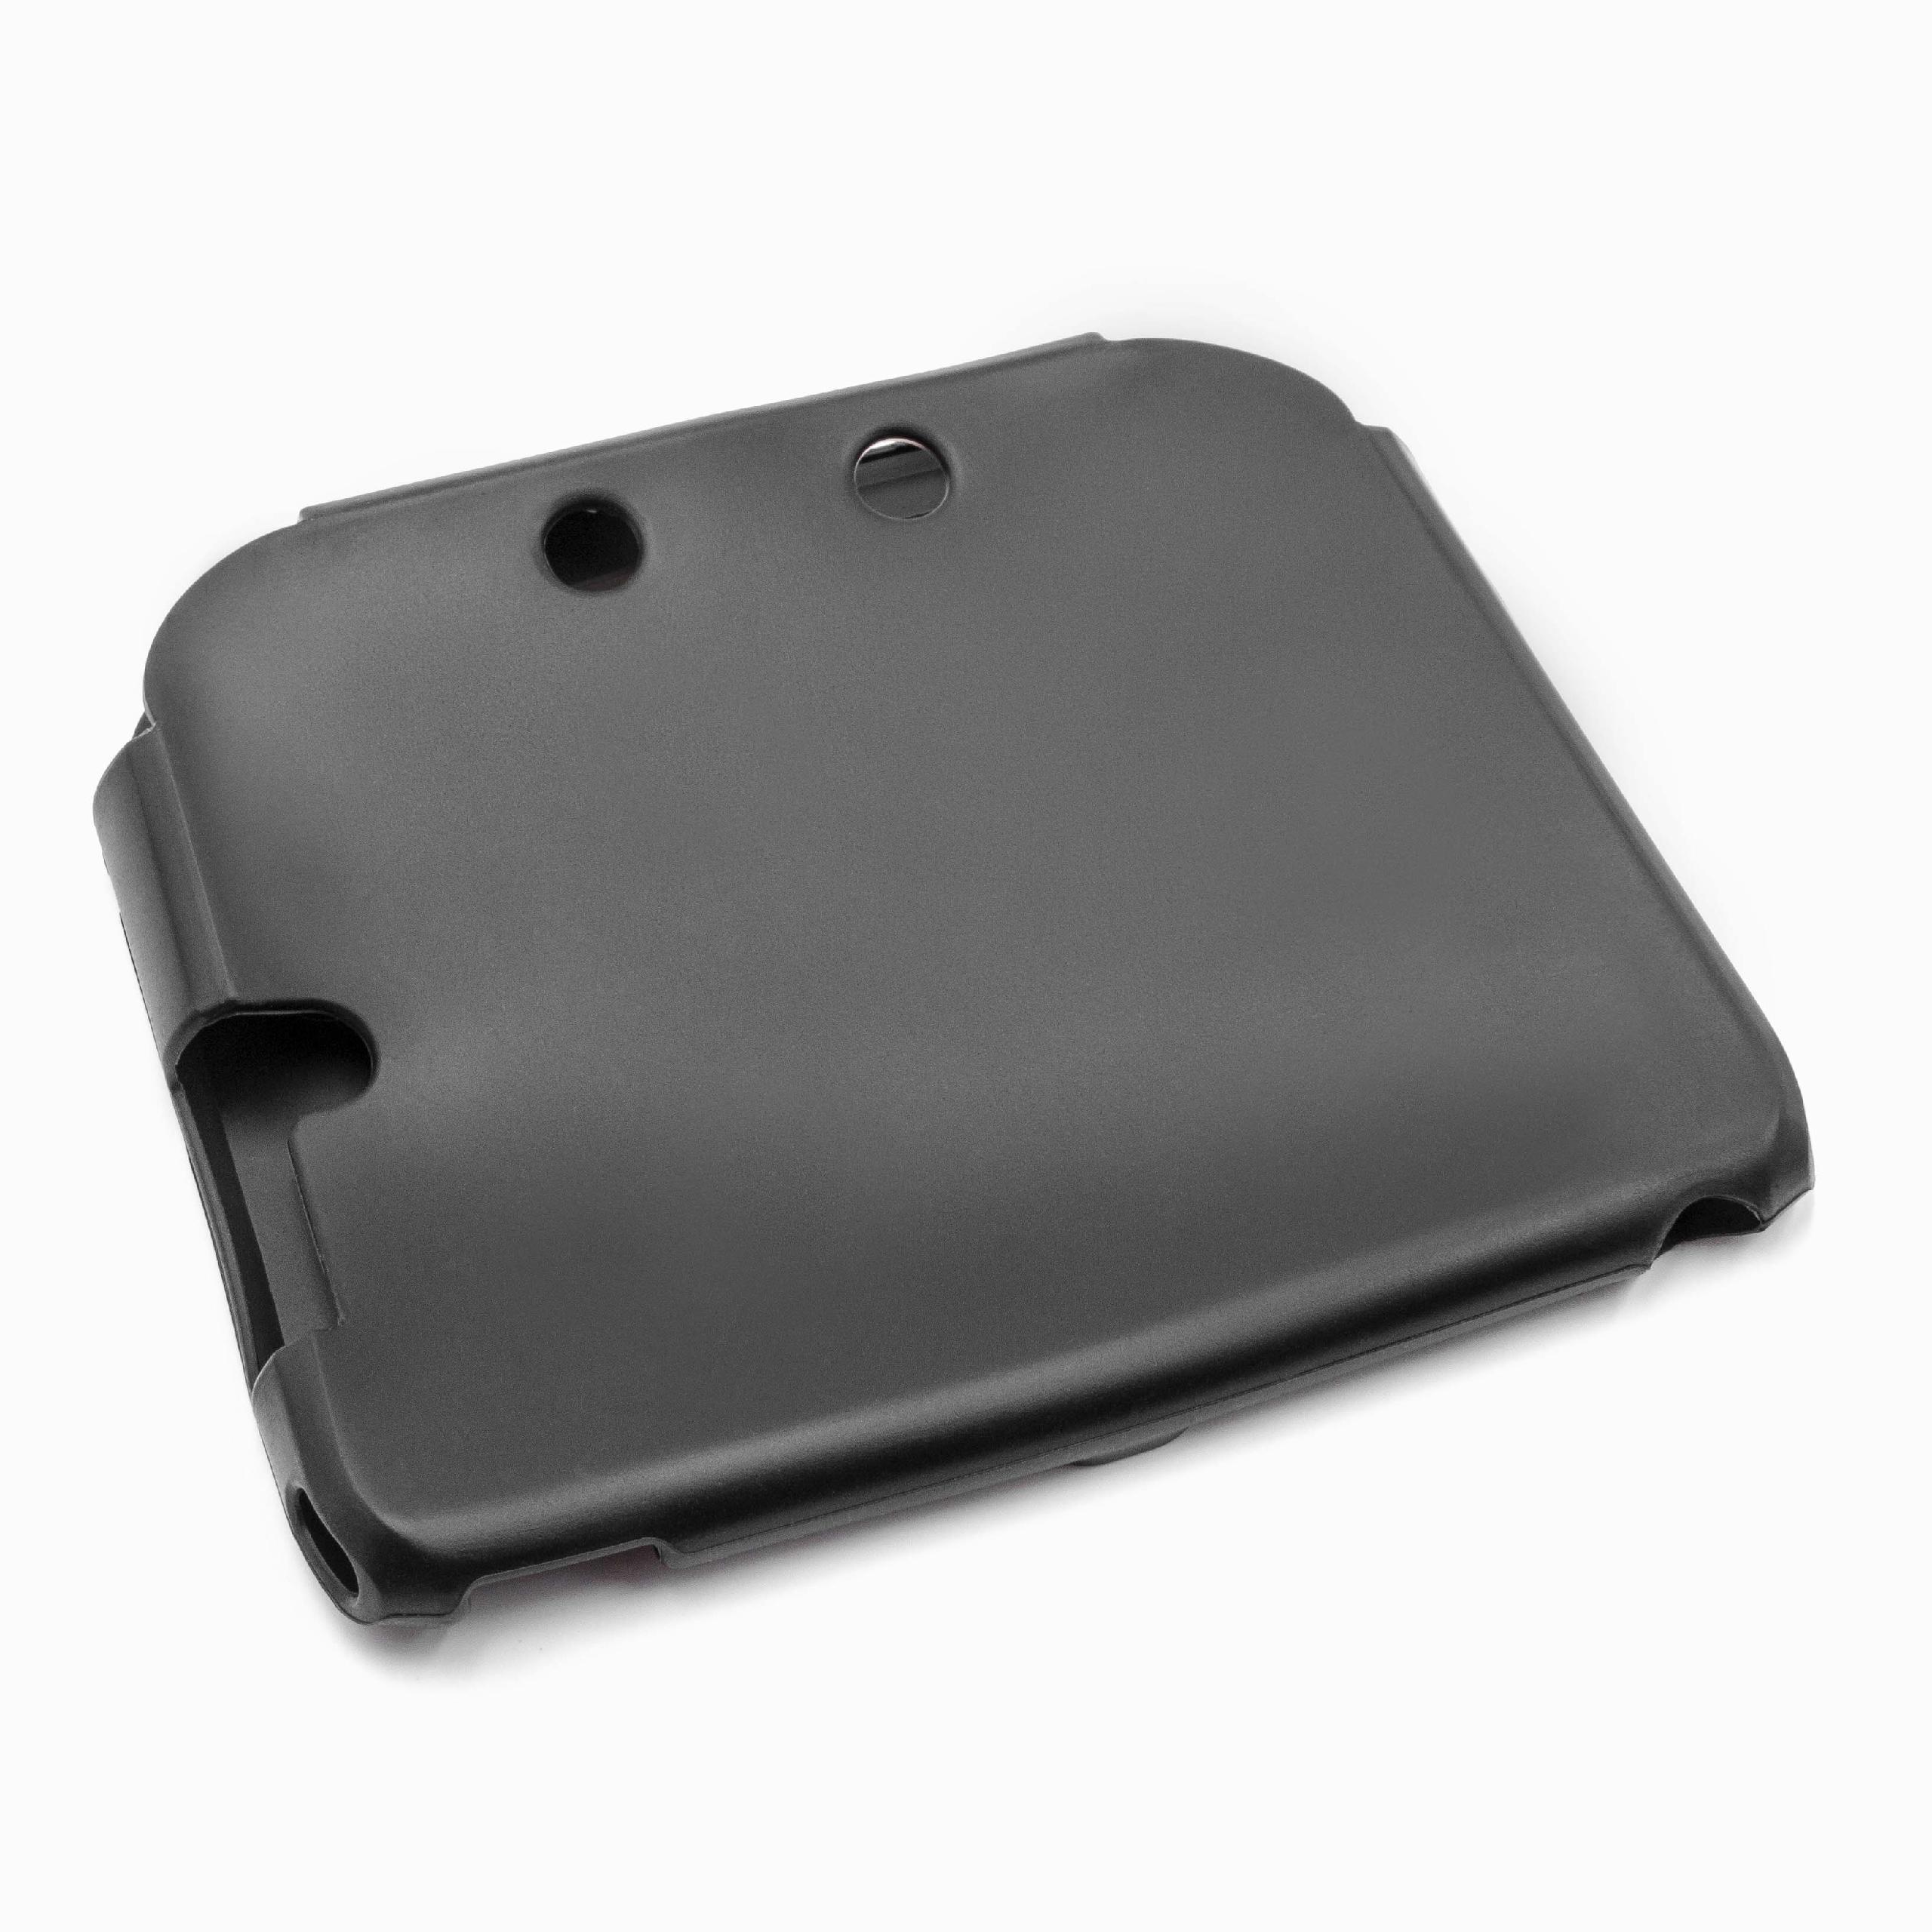 Cover suitable for Nintendo 2DS Gaming Console - Case, Silicone, Black